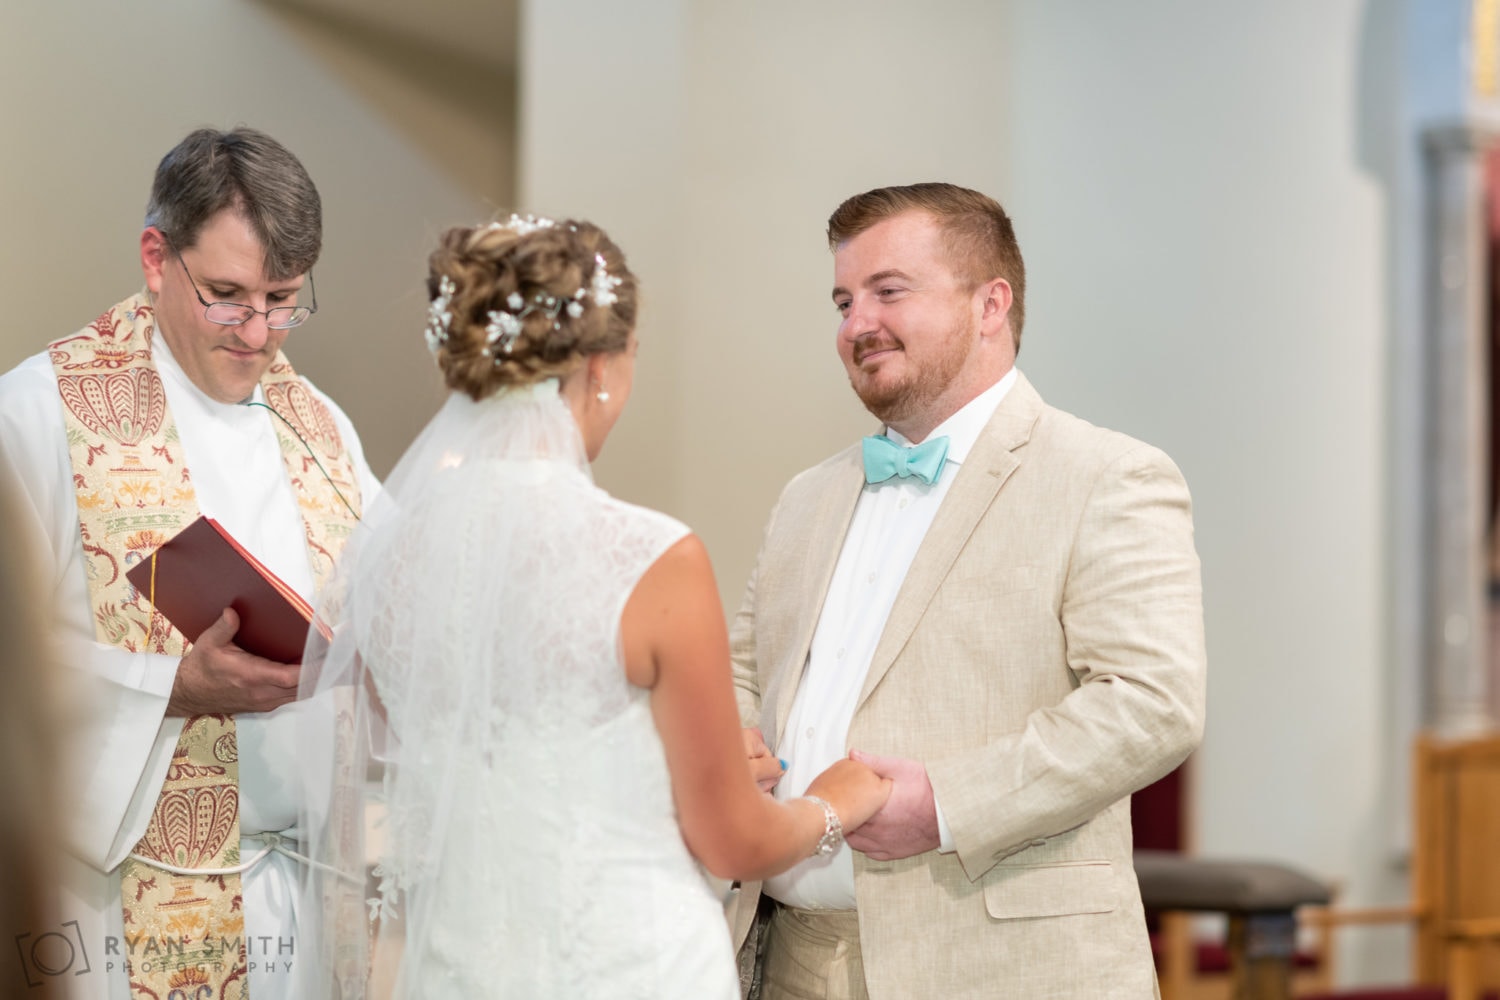 Groom smiling at bride during vows - St. Michael's - Garden City, SC